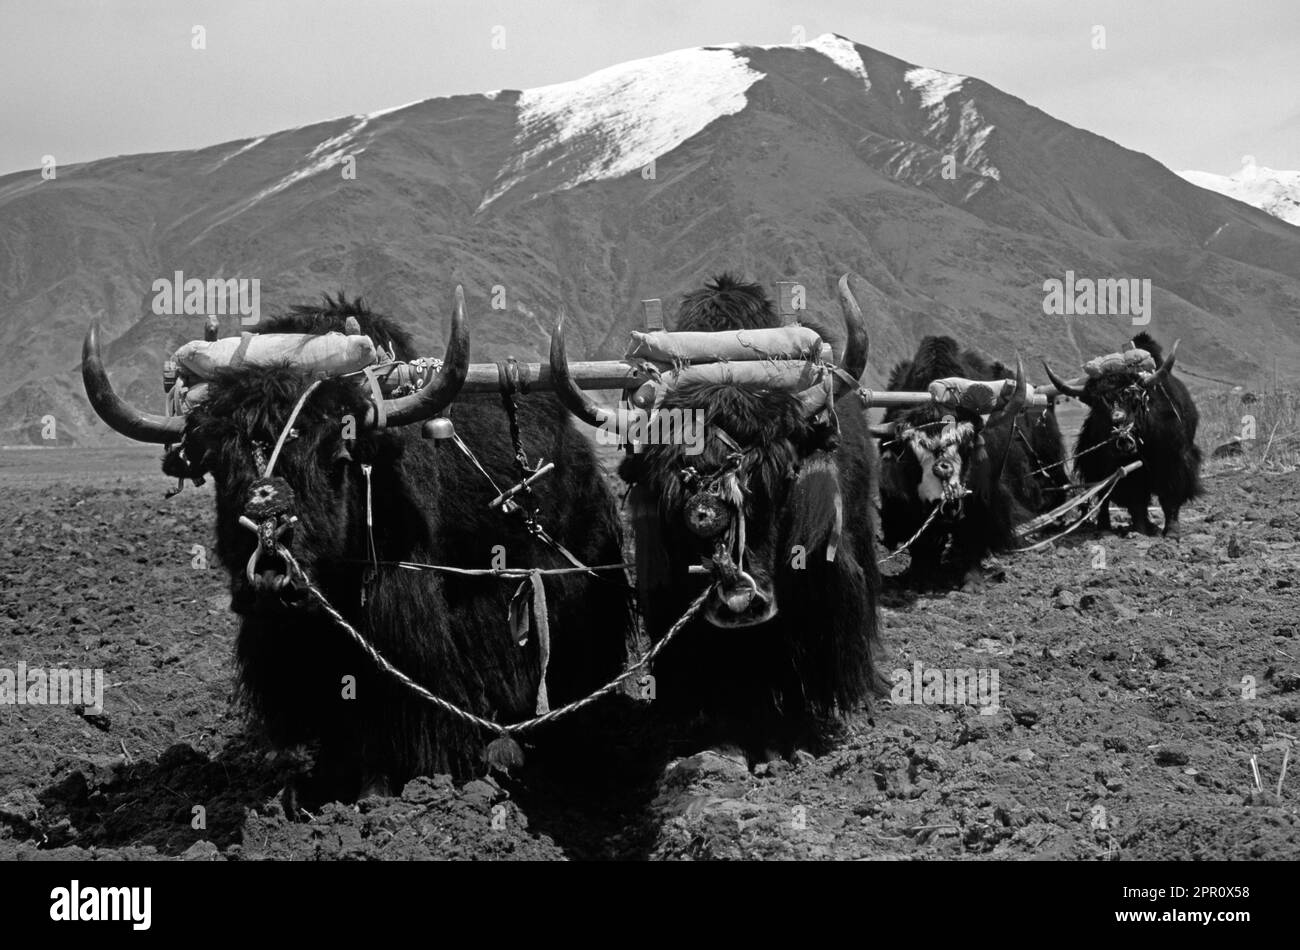 Teams of YAKS are used to PLOW the fields which will be planted with BARLEY & other crops - CENTRAL TIBET Stock Photo